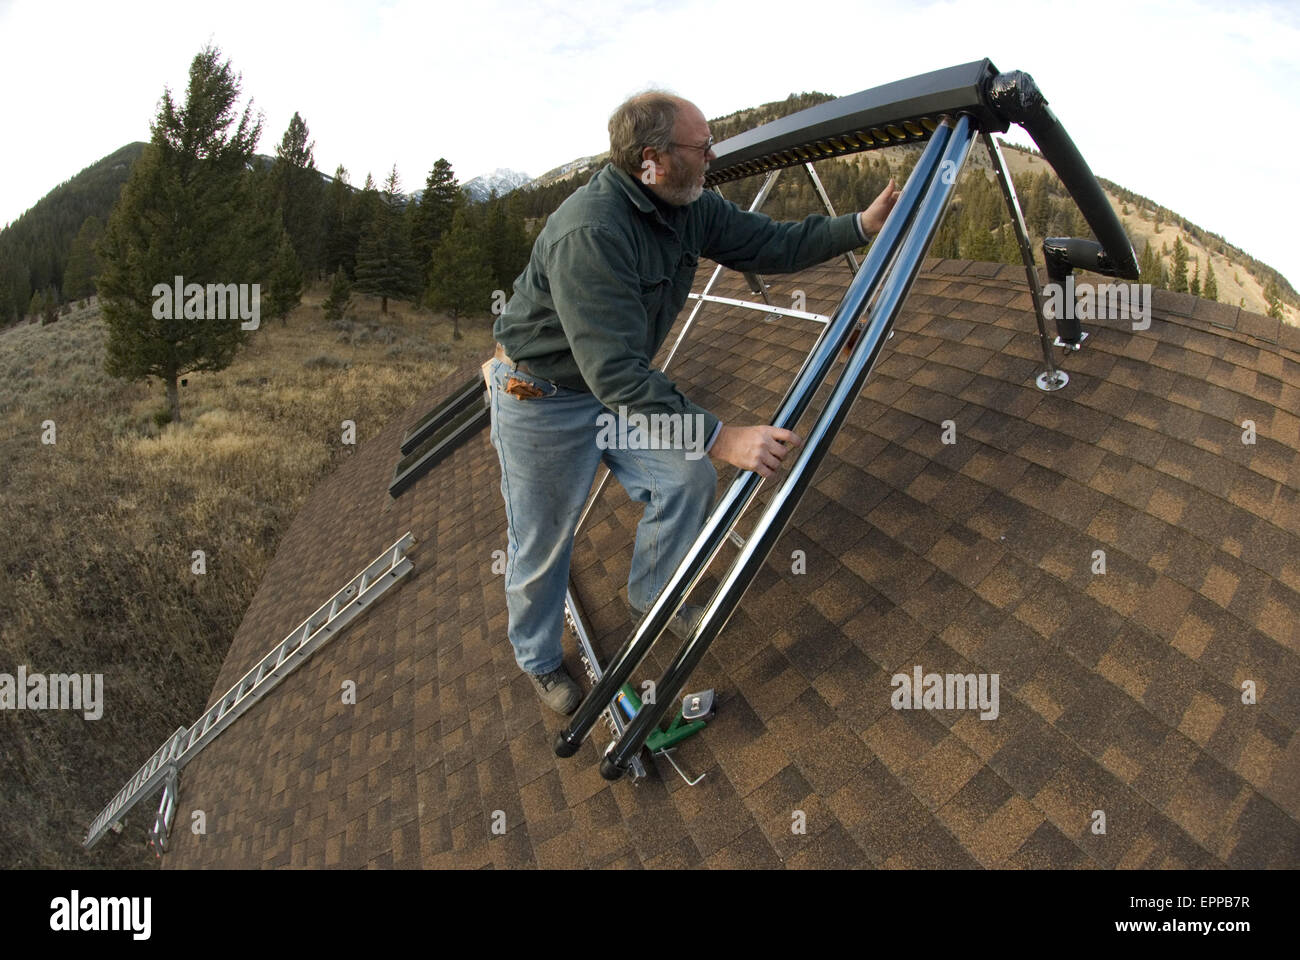 A workman installs a solar hot water system. Stock Photo